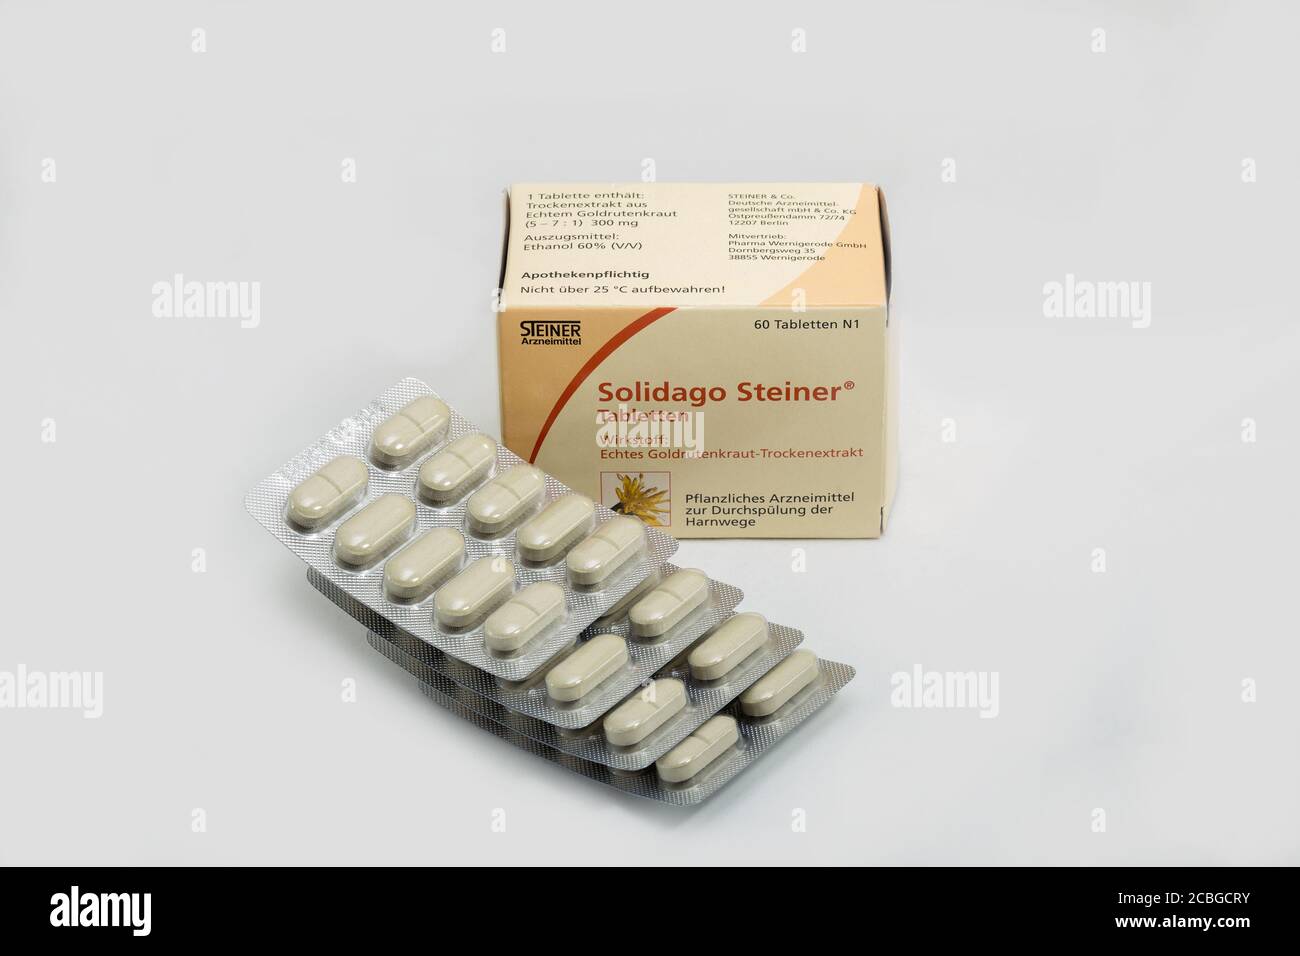 KYIV, UKRAINE - FEBRUARY 17, 2019: Solidago Steiner tablets pack by Aristo Pharma. Aristo Pharma GmbH was founded in 2008 in Berlin, Germany. Stock Photo